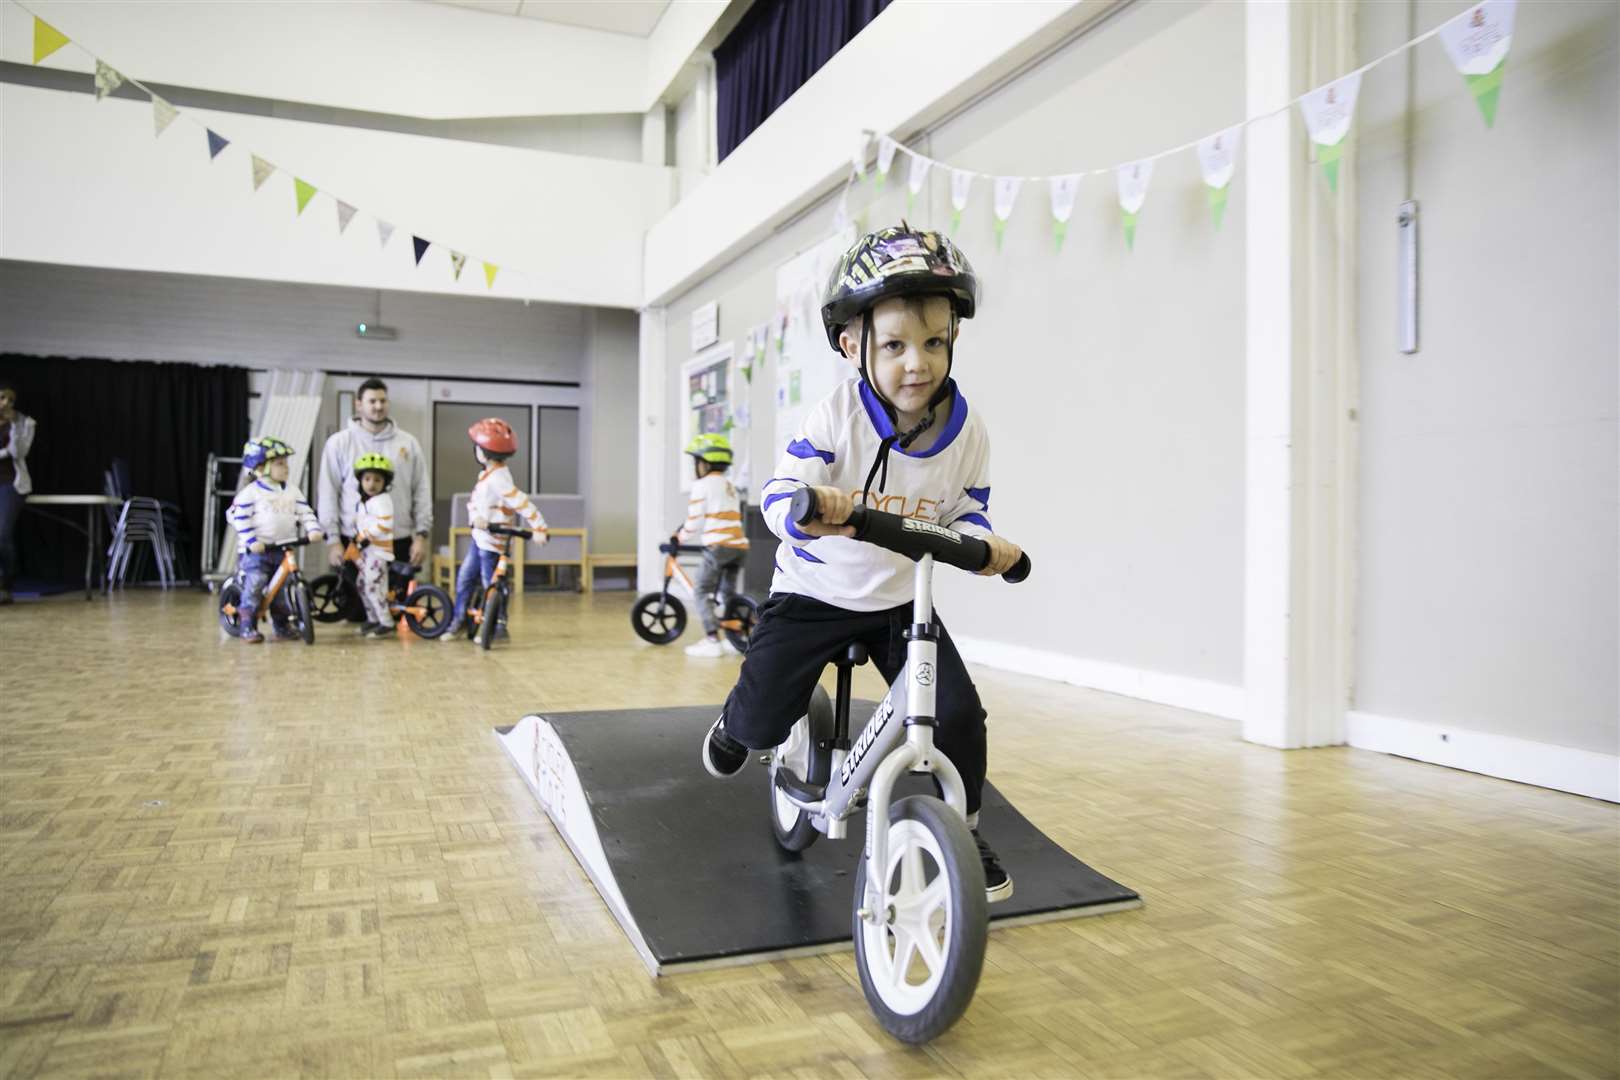 CYCLEme TOTS runs classes in a number of Kent locations